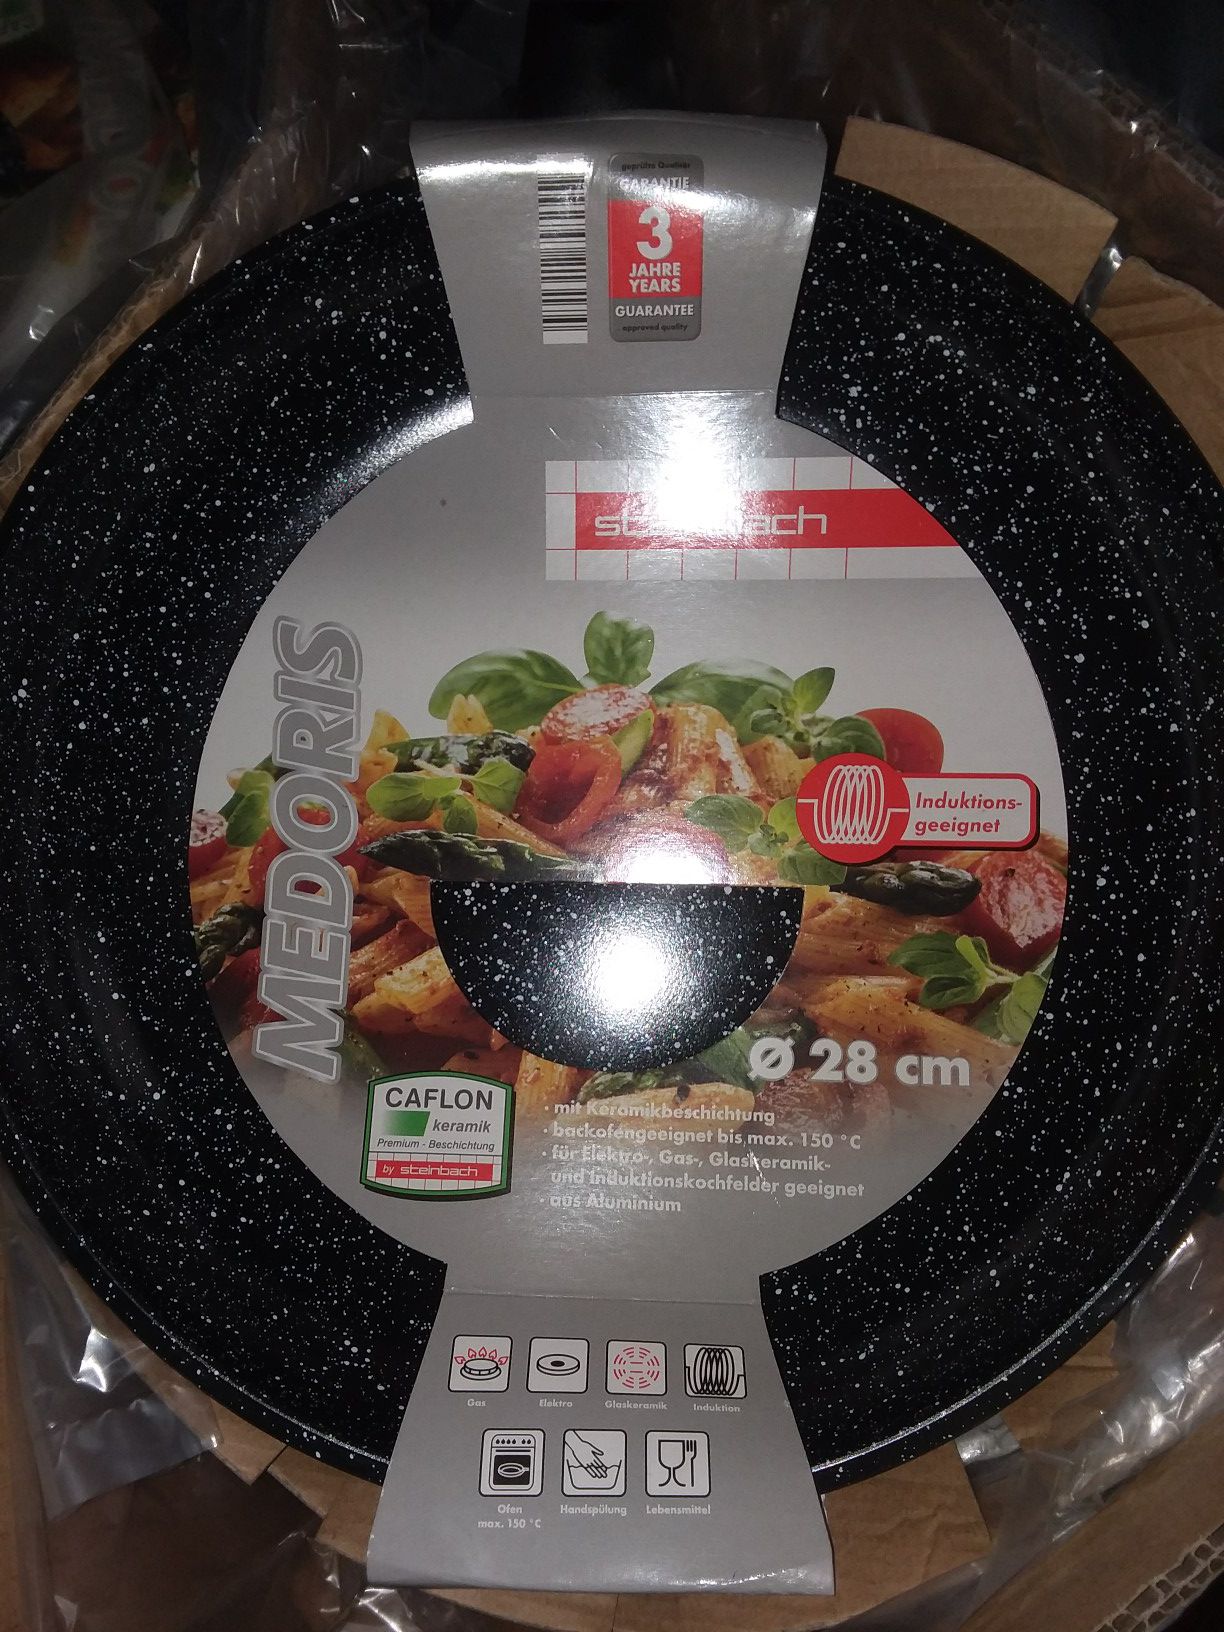 Mueller Austria Healthystone 12”Fry Pan for Sale in South Gate, CA - OfferUp